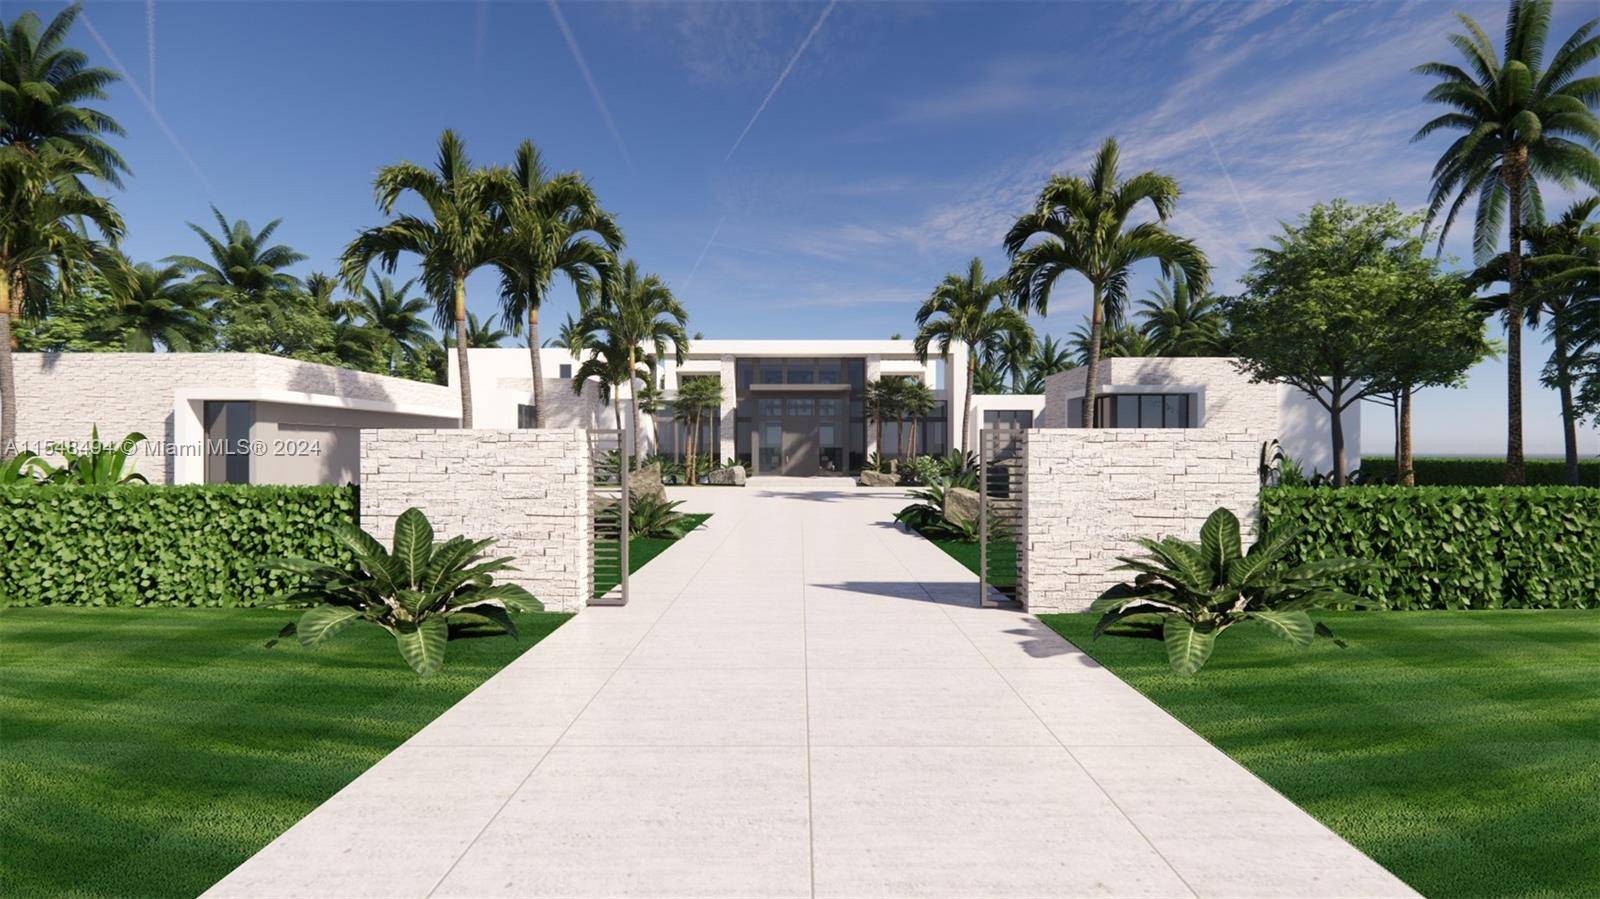 PRE CONSTRUCTION OPPORTUNITY One of a kind modern minimalist design by renowned Affiniti Architects, interiors by Jennifer Rosenthal Design.